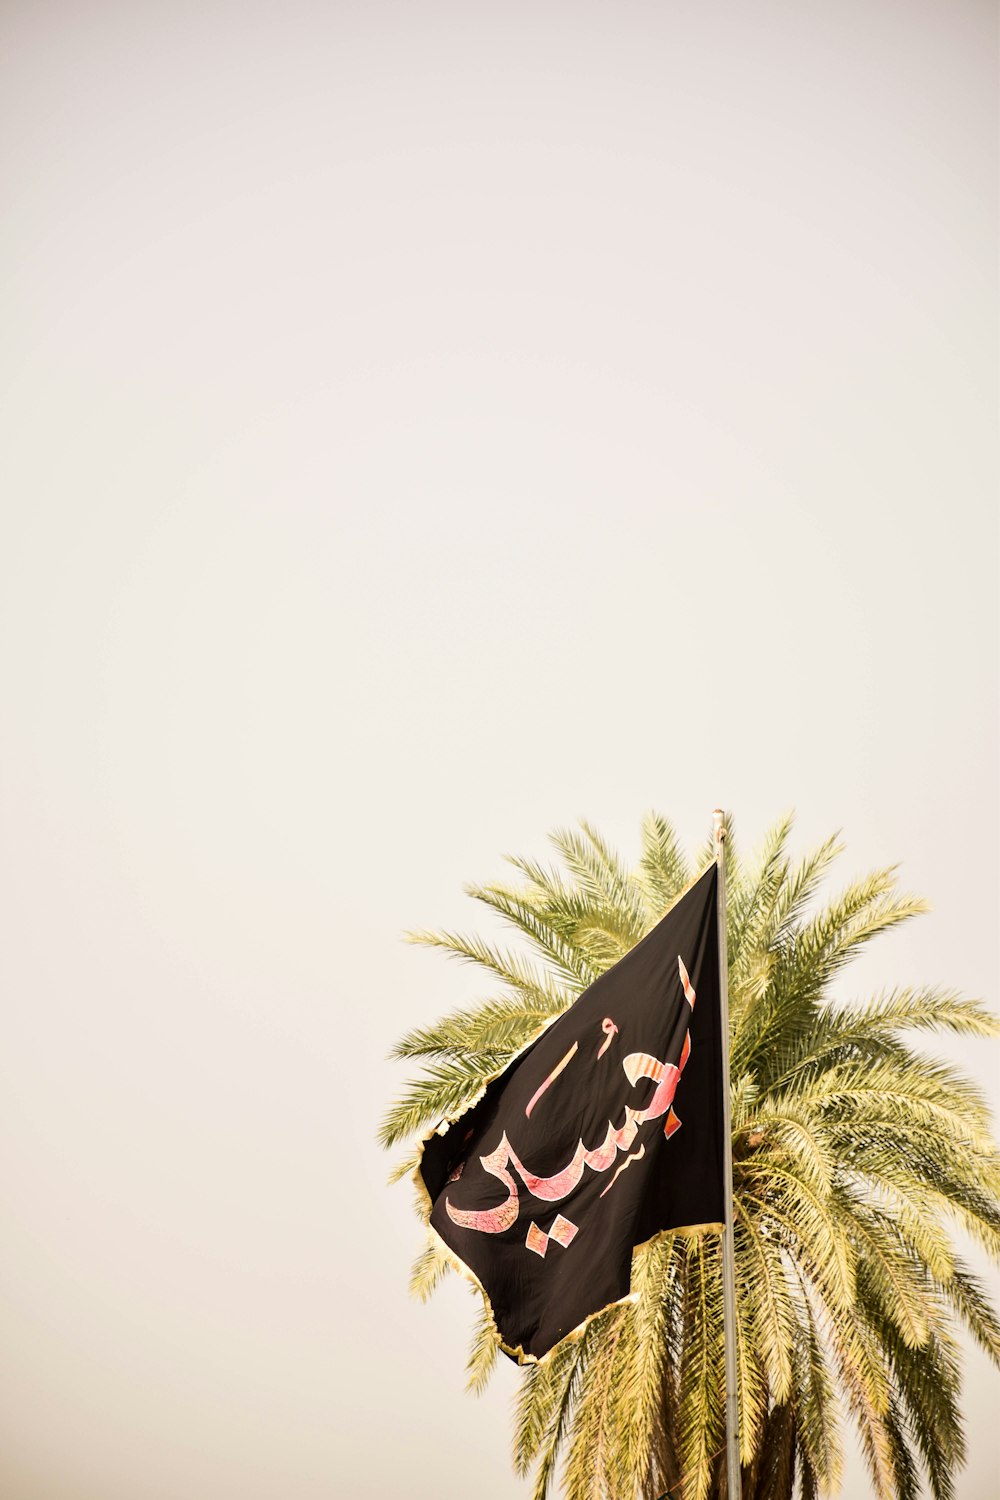 black and red flag on a pole beside green coconut tree